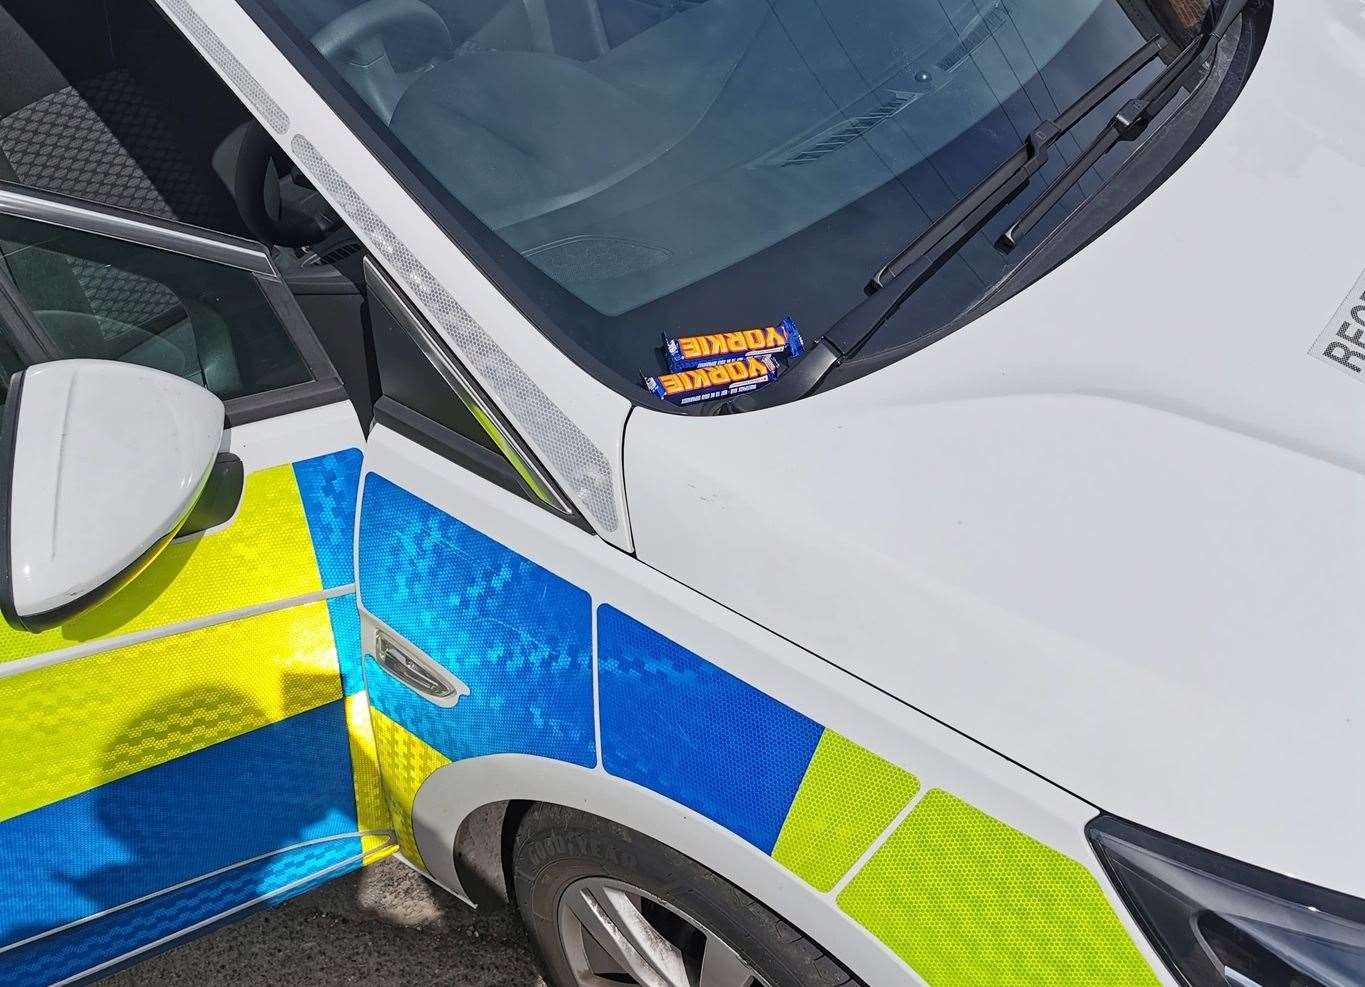 Police in Ashford found Yorkie bars had been placed on their windscreen